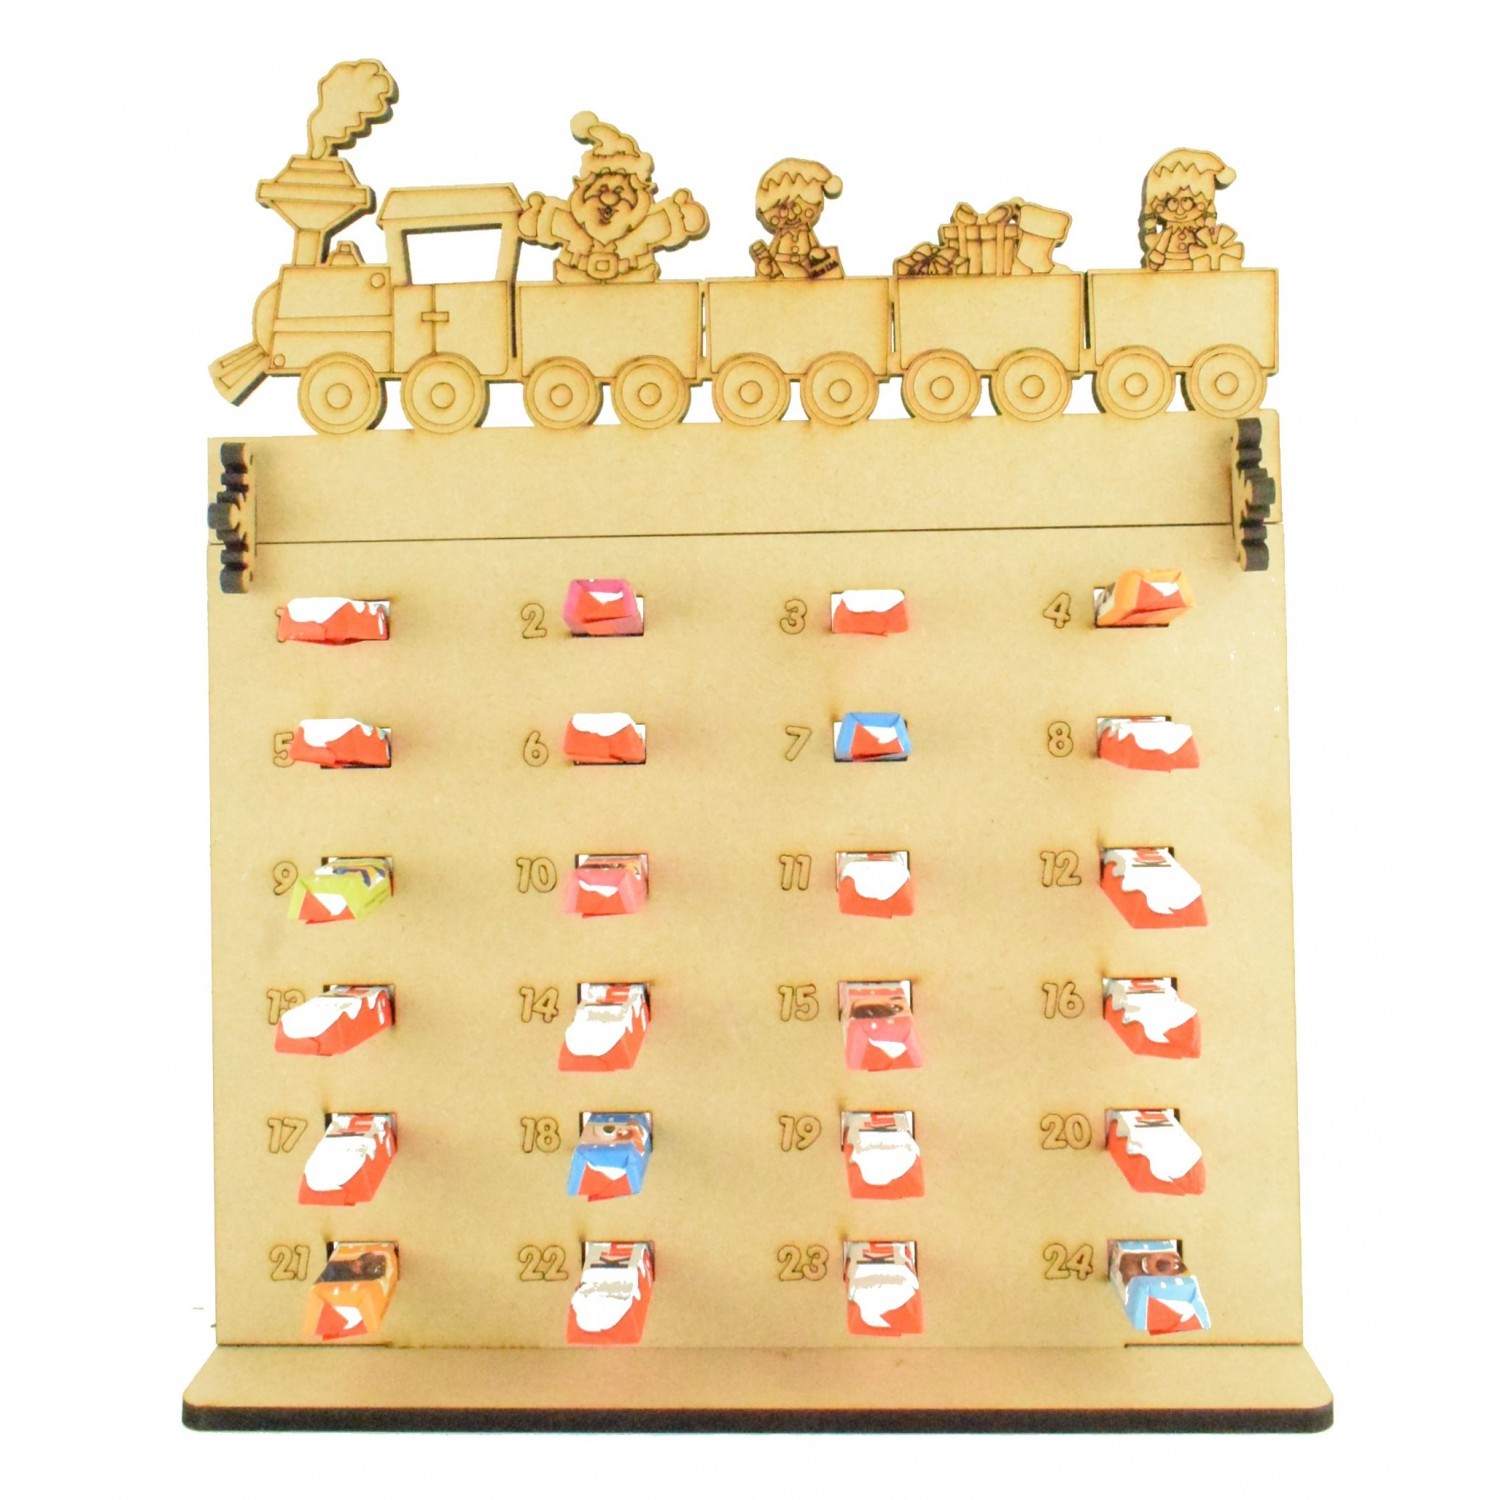 The leading supplier of Christmas Advent Calendars